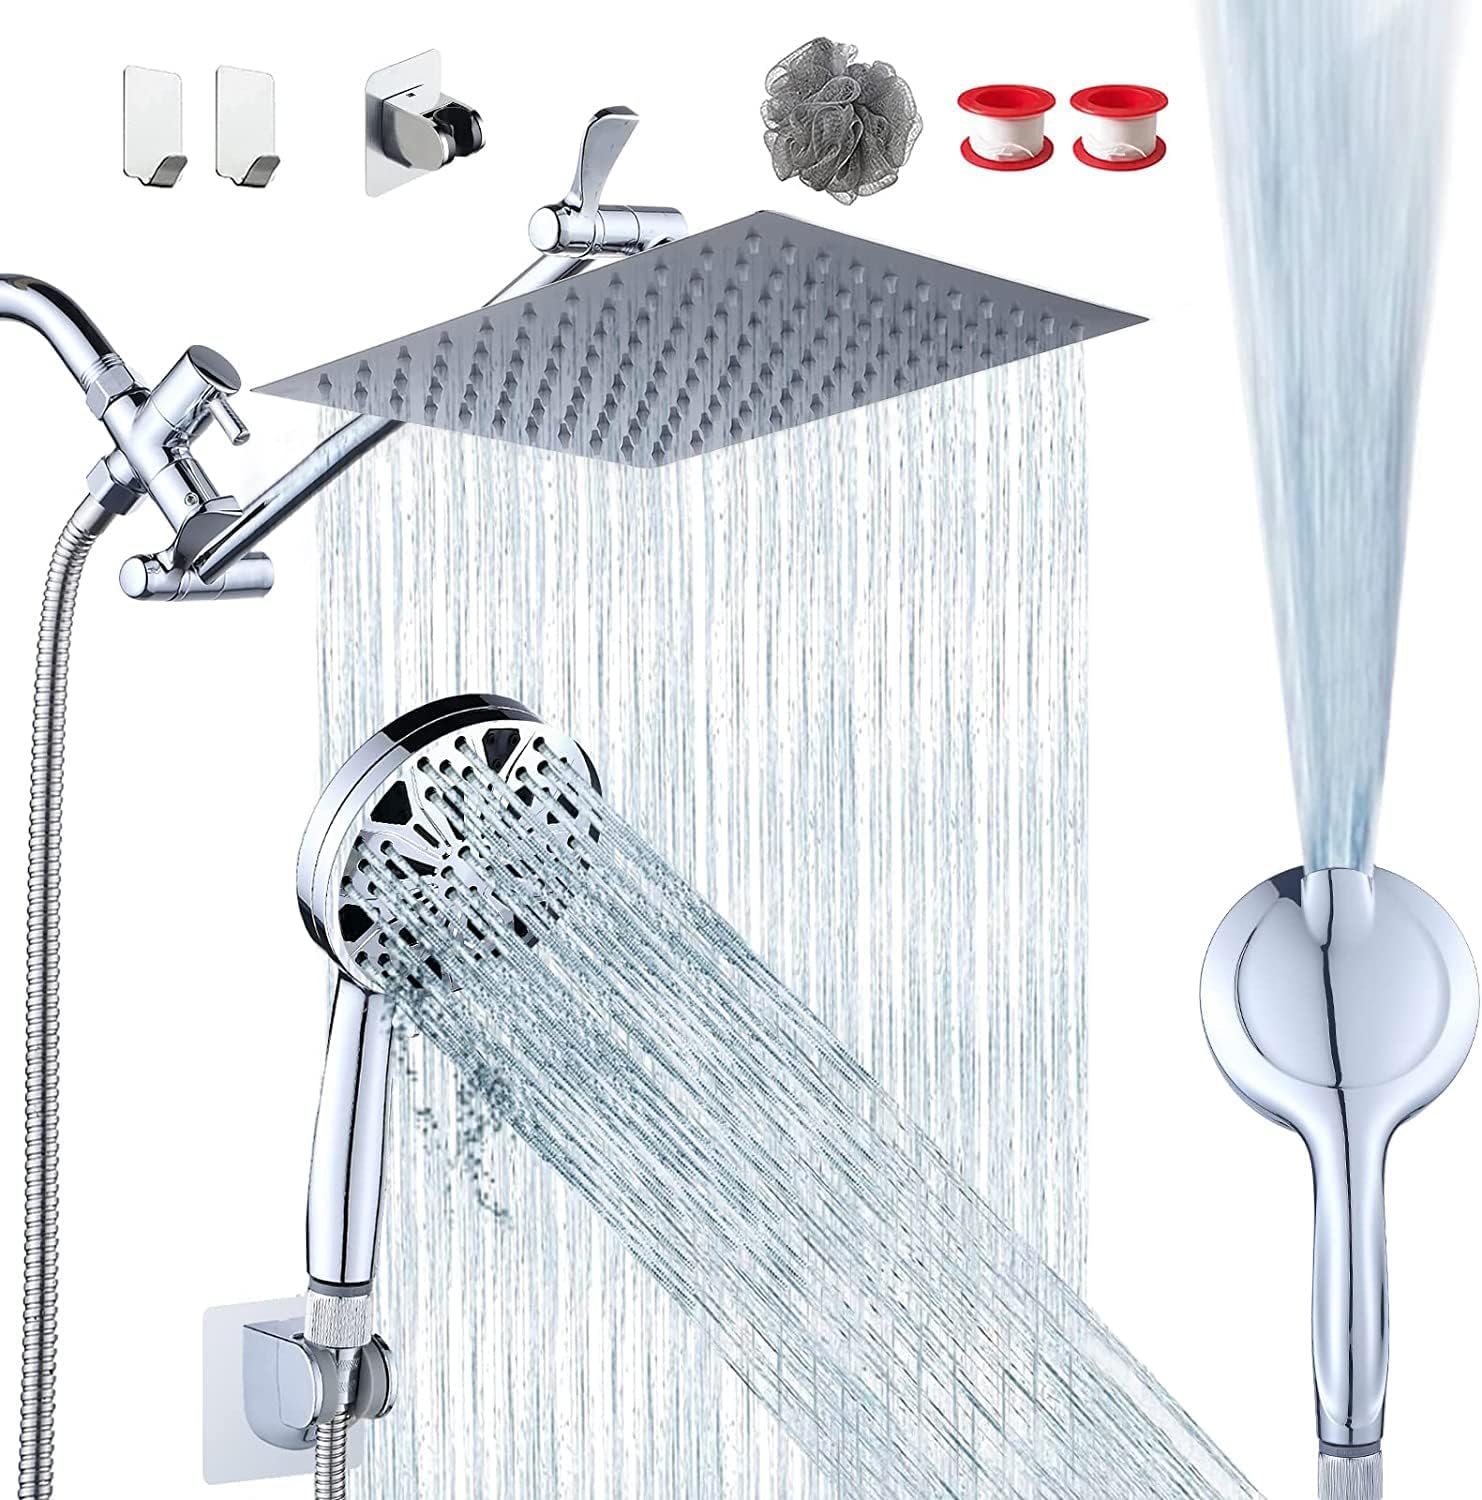 Razime 10 Rainfall Shower Head with Handheld Combo, Chrome Finish, 8+2 Mode, 11 Adjustable Extension Arm, 100 Self-Cleaning Nozzles, Modern Style, Chrome